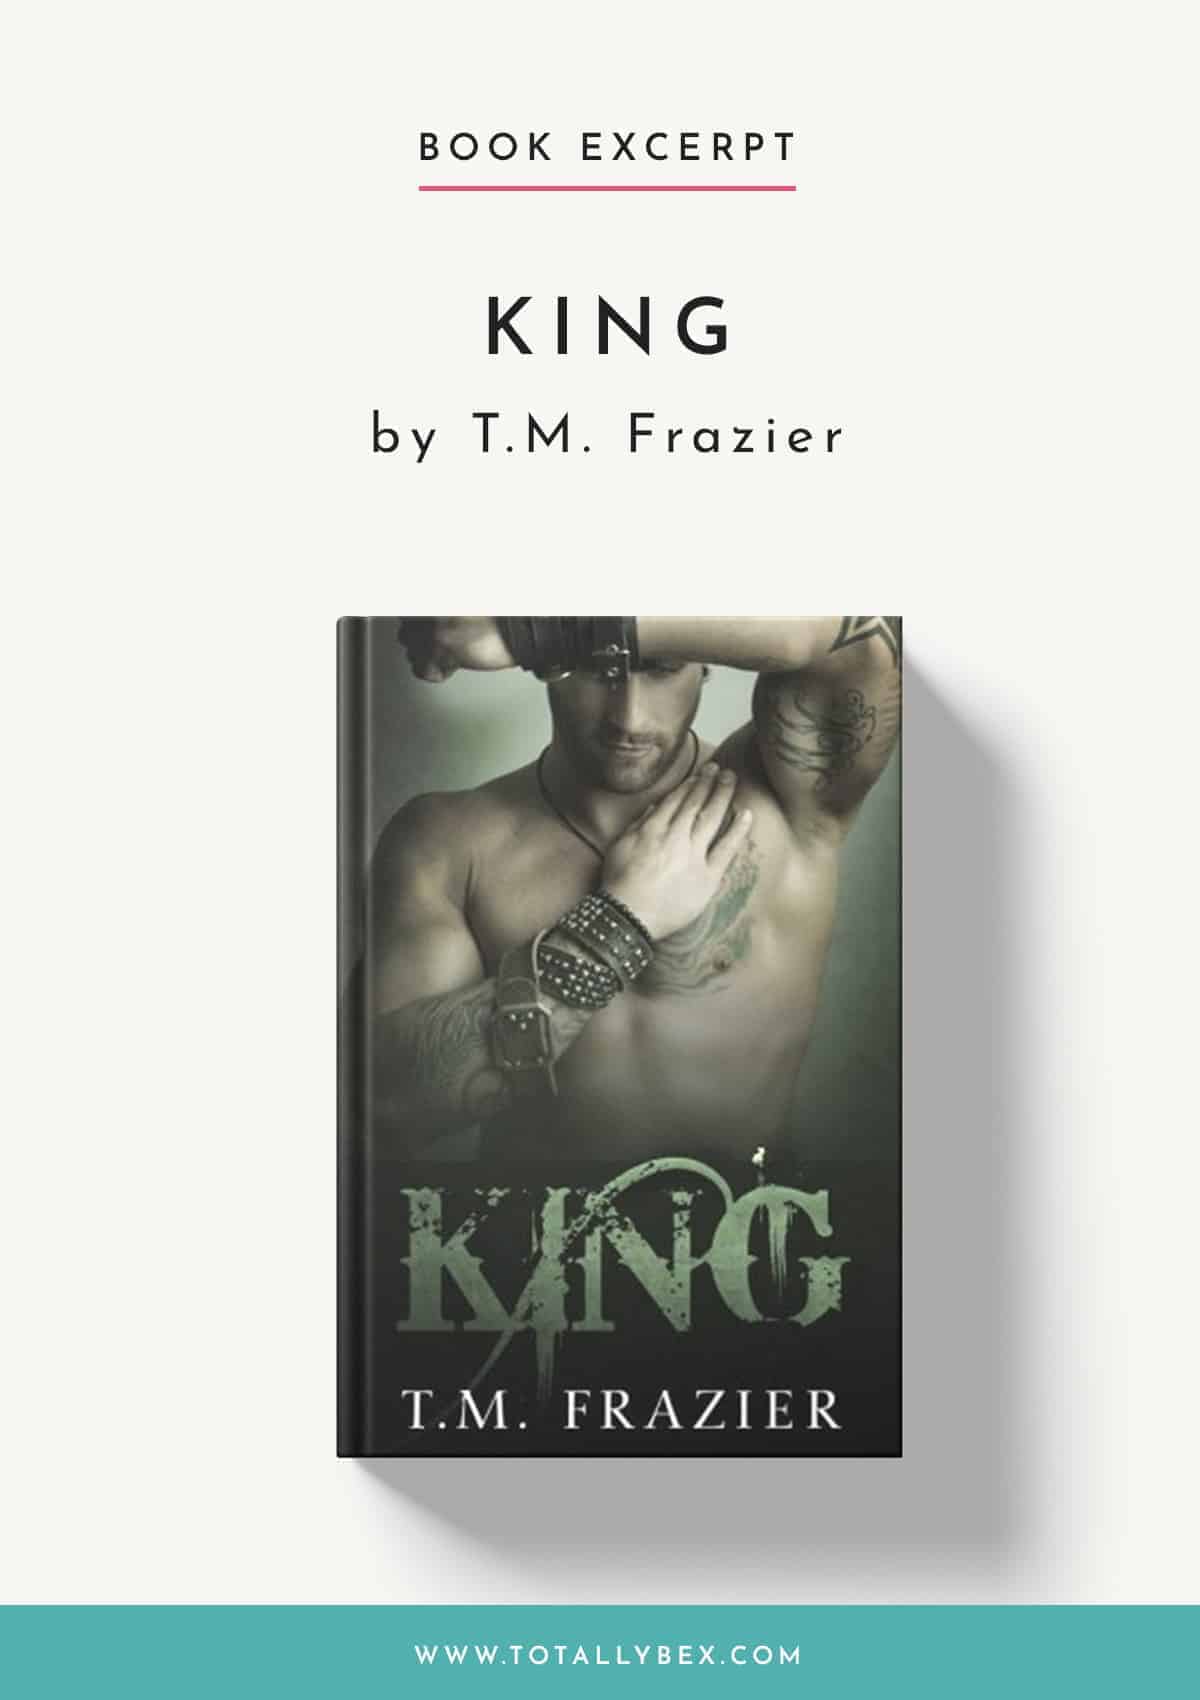 King by T M Frazier – Read an Excerpt of Book 1!